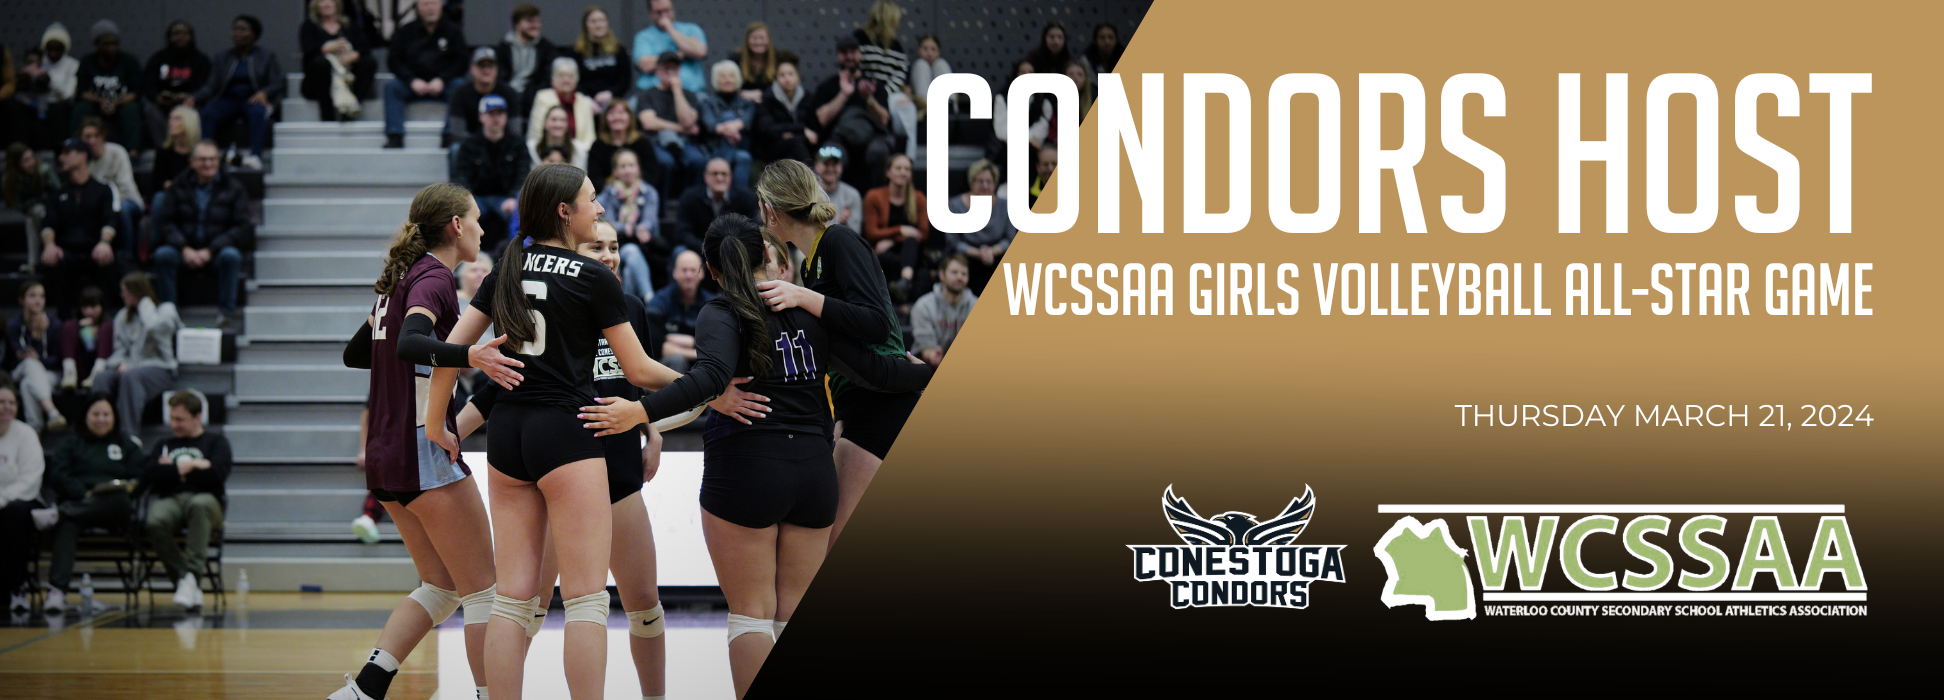 Text that reads: Condors Host WCSSAA Girls Volleyball All-Star Game. 

Conestoga Condors Logo 
WCSSAA logo 

Photo of girls playing volleyball 